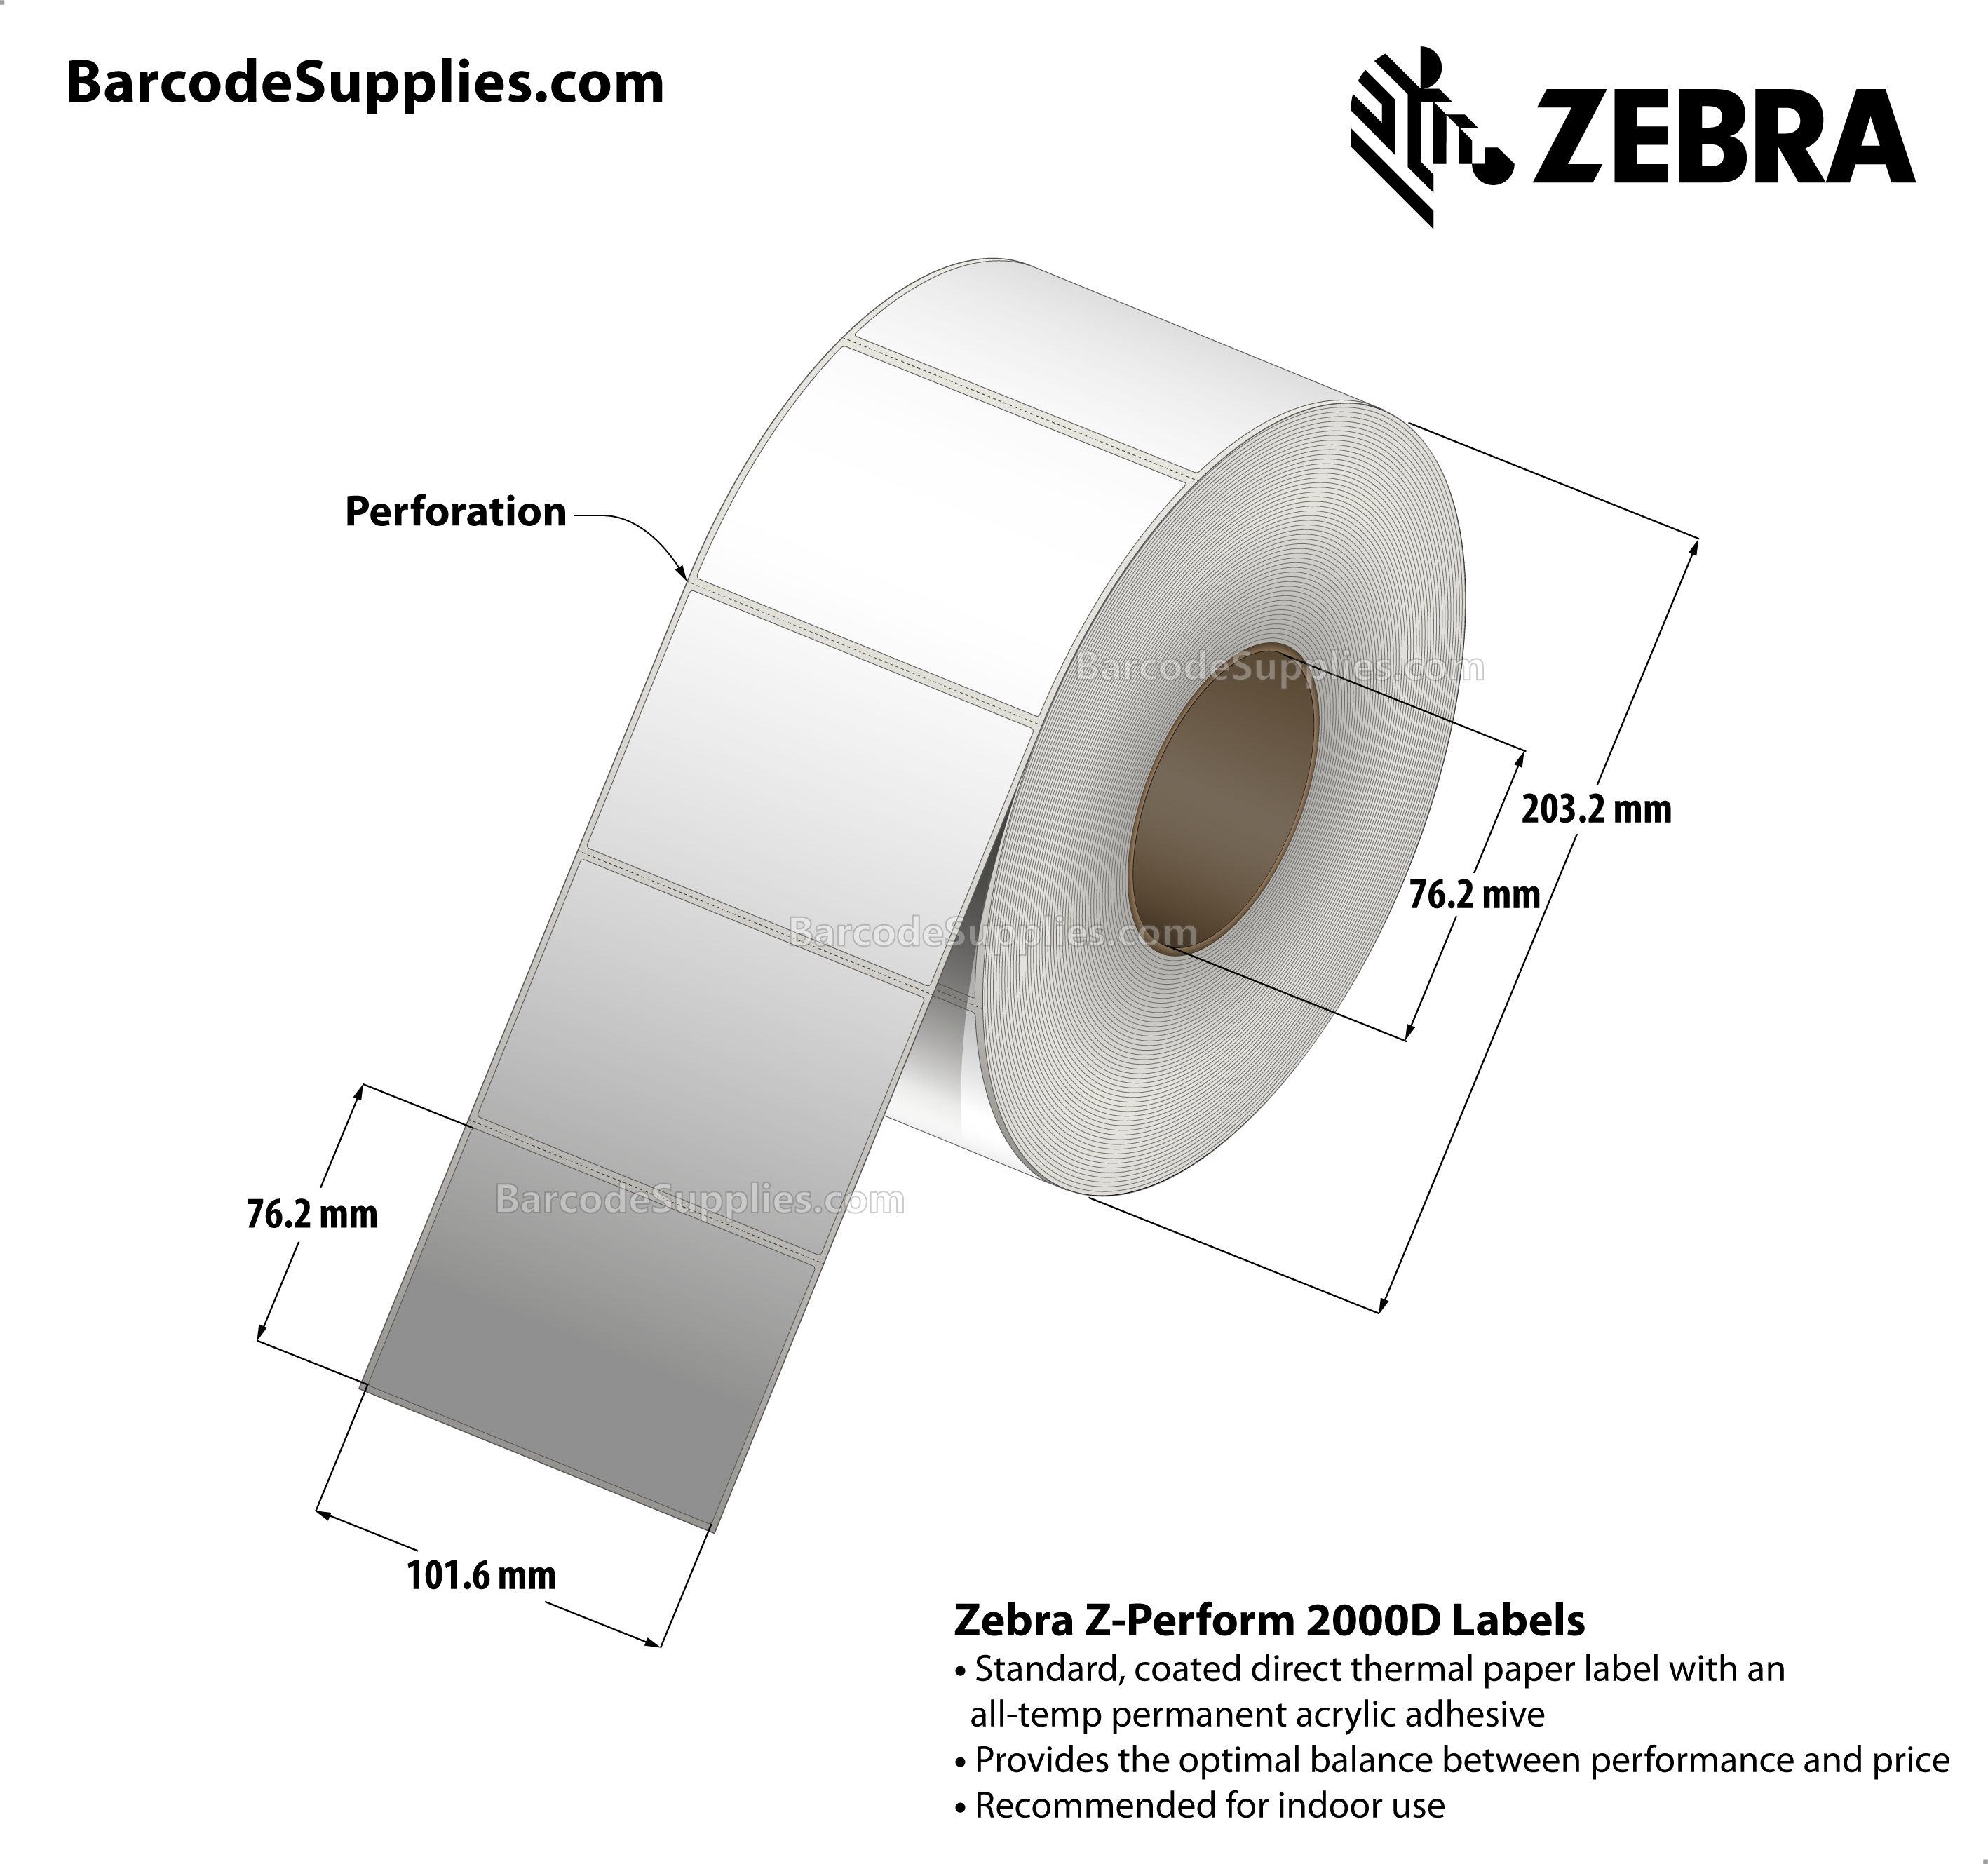 4 x 3 Direct Thermal White Z-Perform 2000D Labels With All-Temp Adhesive - Perforated - 2000 Labels Per Roll - Carton Of 4 Rolls - 8000 Labels Total - MPN: 10000293